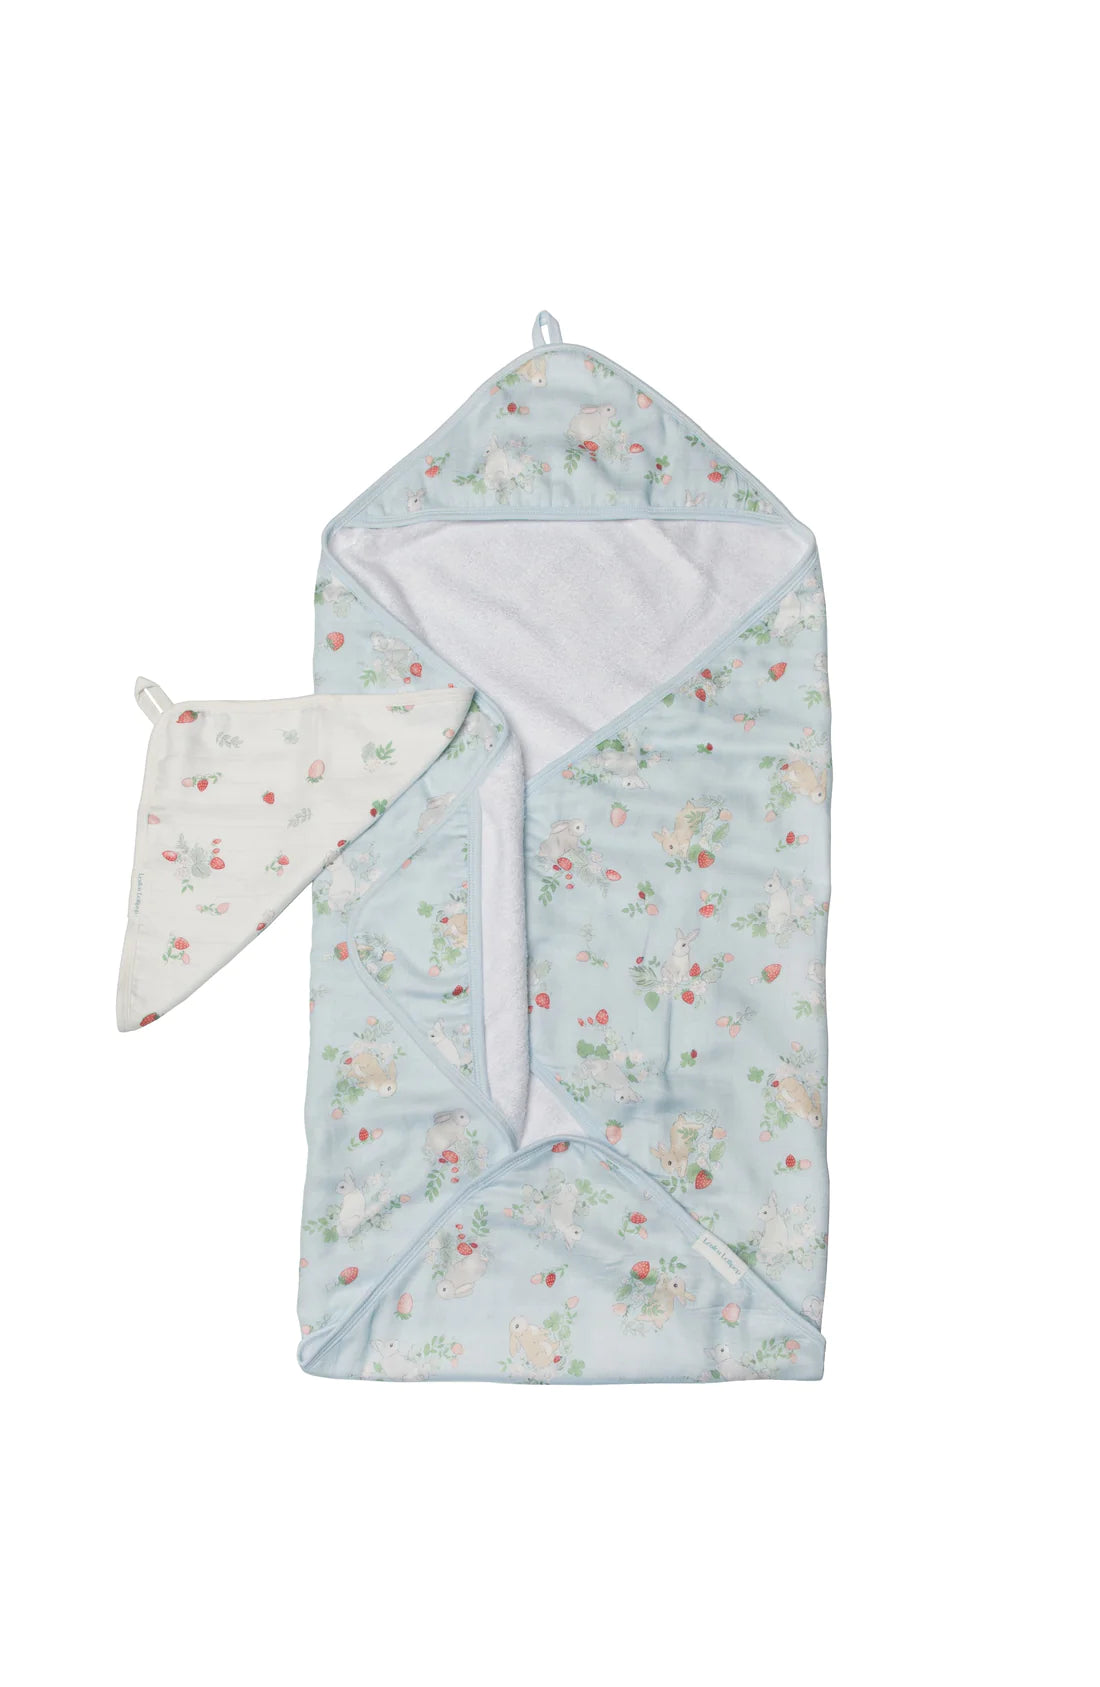 Loulou Lollipop Hooded Towel and Washcloth Set - Some Bunny Loves You